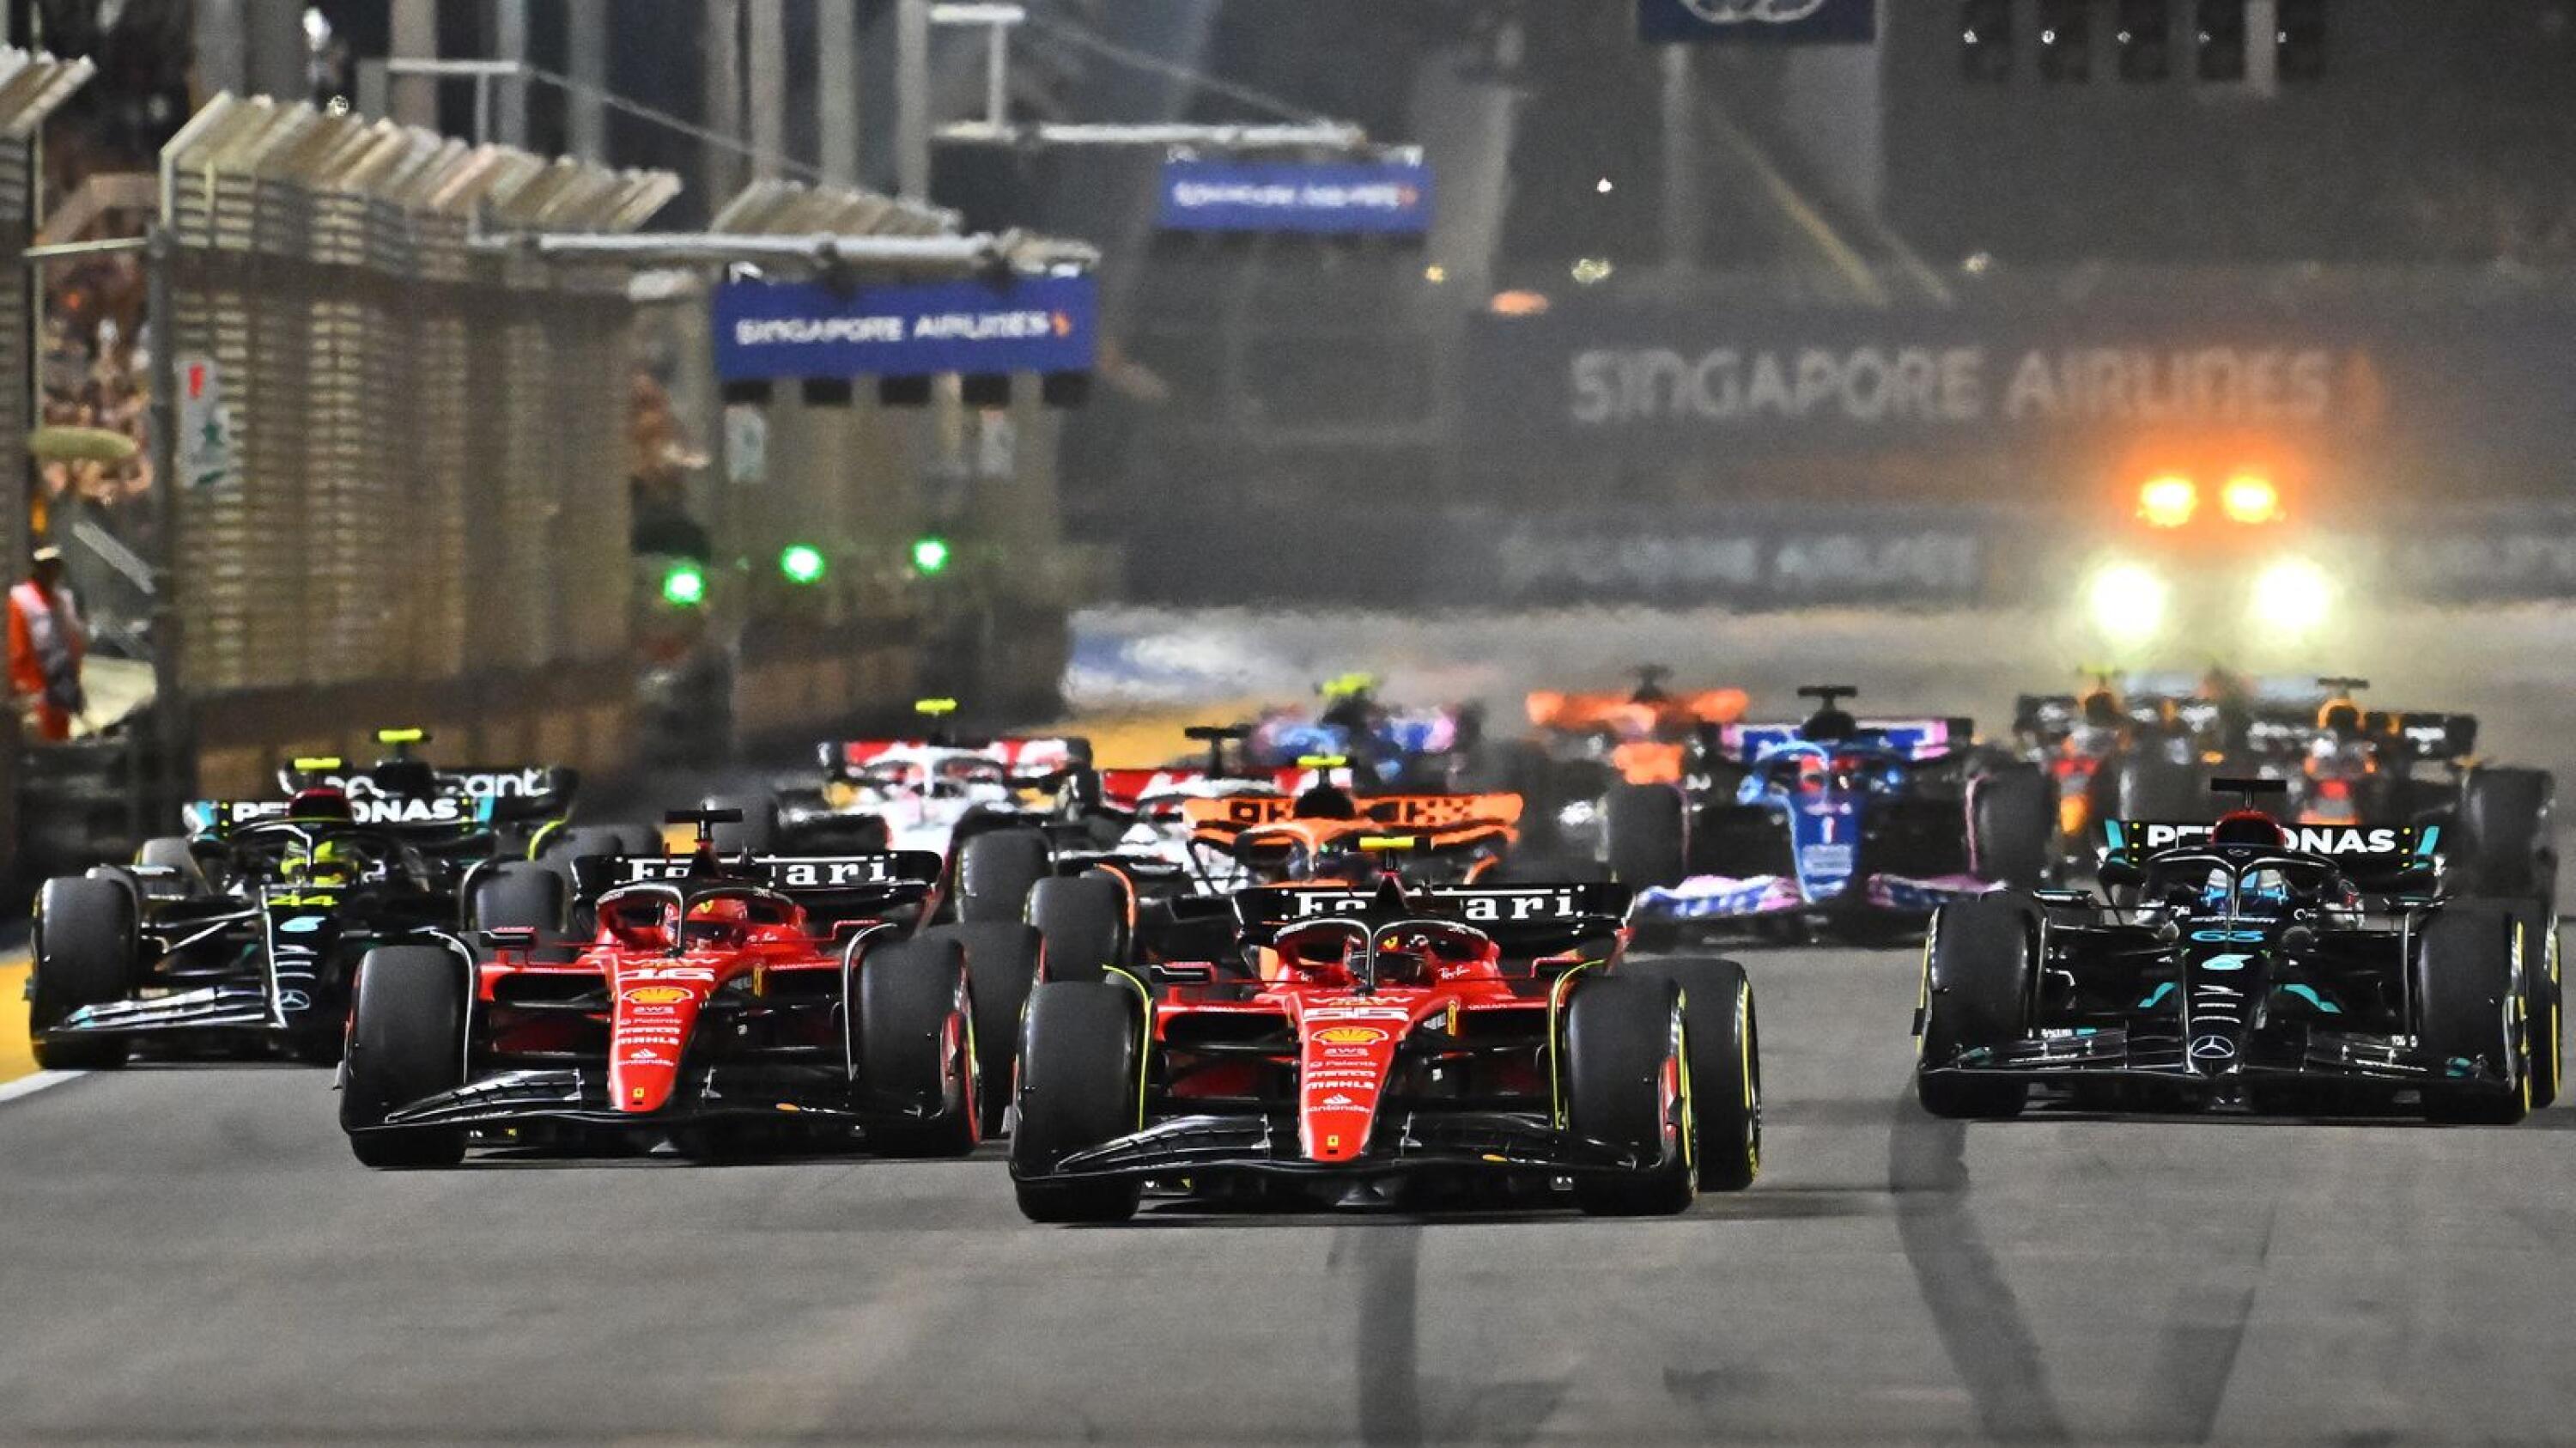 Ferrari's Spanish driver Carlos Sainz Jr drives in front of the field during the start of the Singapore Formula One Grand Prix night race